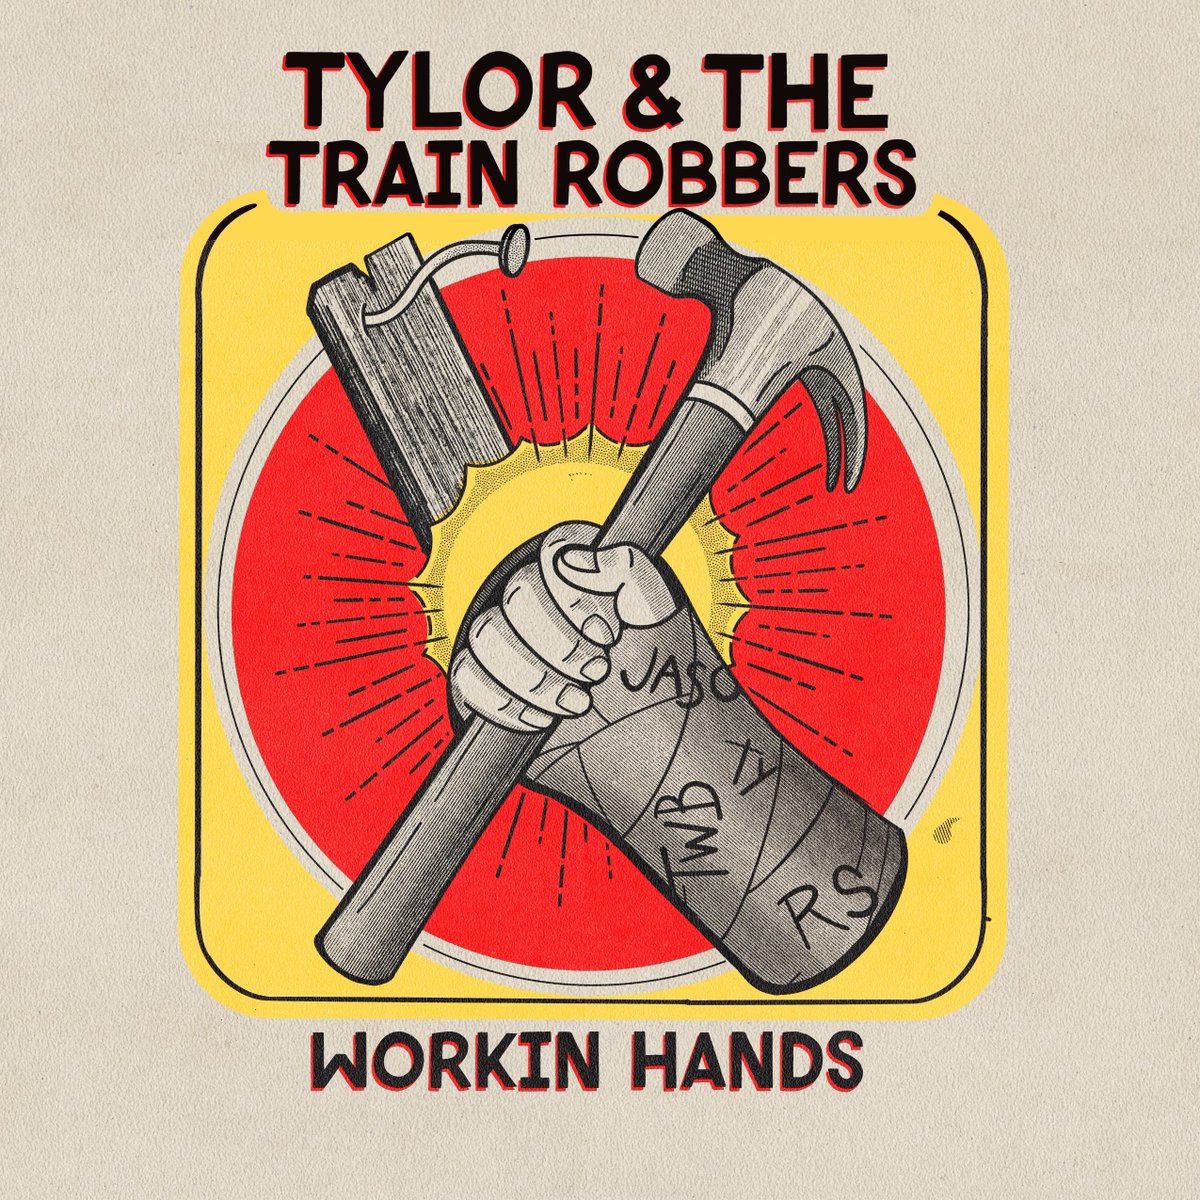 Tylor & the Train Robbers single, 'Working Hands' just added to the @dittytv  spotify playlist for 'New Music Friday'!! Thank you @RobinVibezz !
open.spotify.com/playlist/2yOIk…